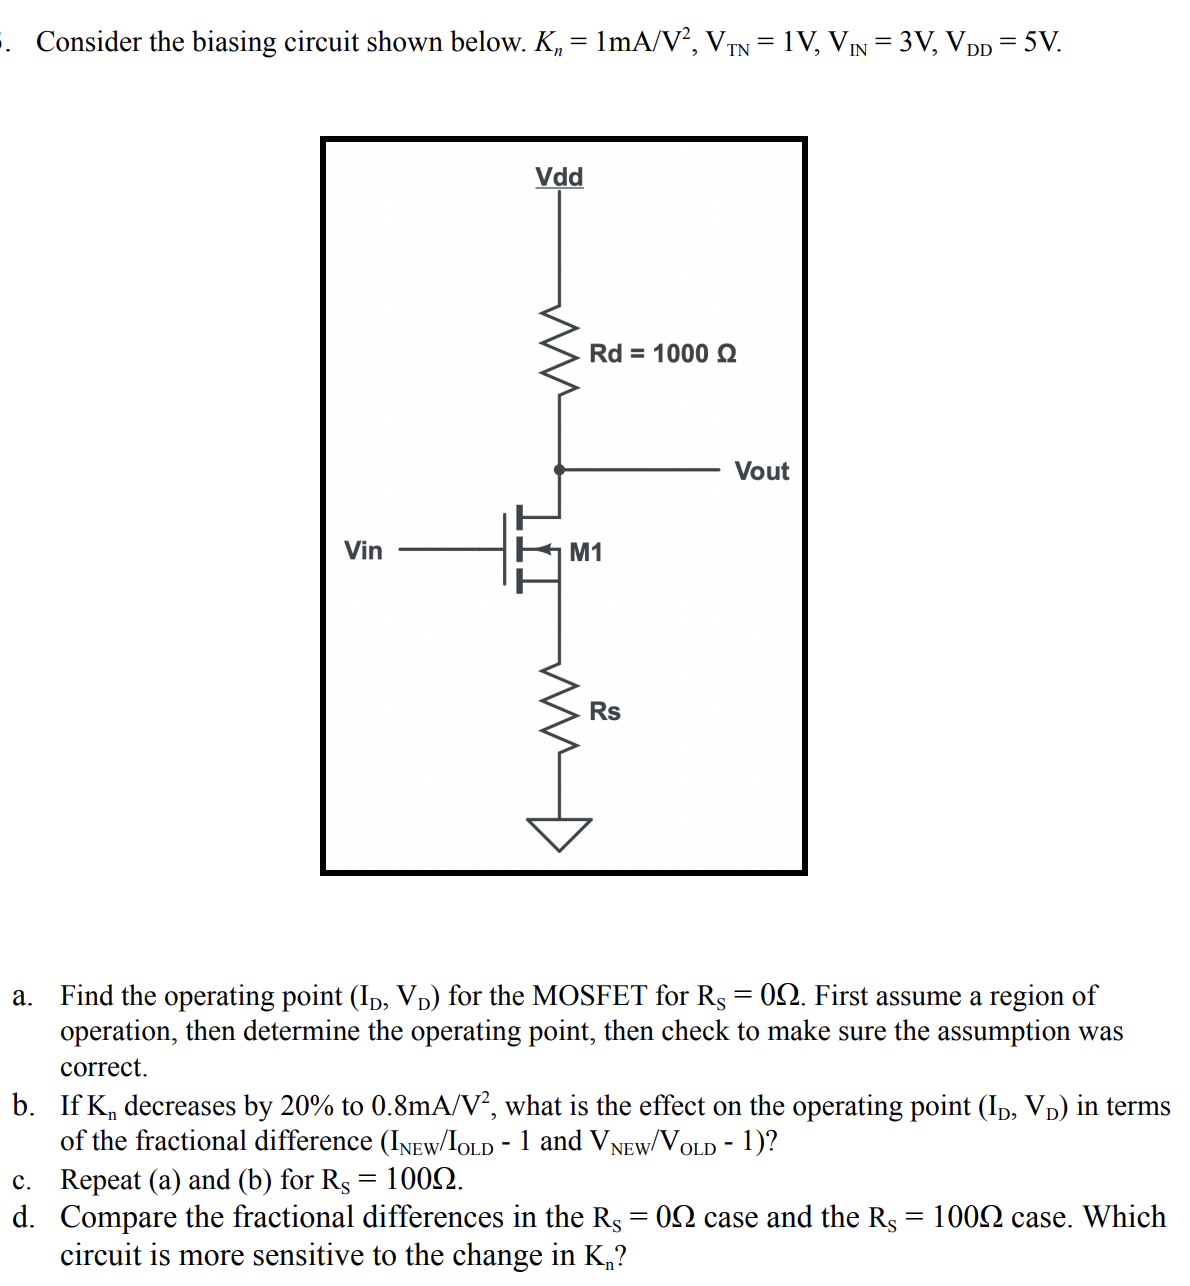 . Consider the biasing circuit shown below. K, = 1mA/V, VIN = 1V, VỊN = 3V, VDD = 5V.
||
Vdd
Rd = 1000 Q
Vout
Vin
M1
Rs
a. Find the operating point (Ip, Vp) for the MOSFET for Rs= 02. First assume a region of
operation, then determine the operating point, then check to make sure the assumption was
correct.
b. If K, decreases by 20% to 0.8mA/V², what is the effect on the operating point (Ip, Vp) in terms
of the fractional difference (INEW/IOLD - 1 and VNEW/VOLD - 1)?
c. Repeat (a) and (b) for Rs = 1002.
d. Compare the fractional differences in the Rs = 02 case and the Rs = 1002 case. Which
circuit is more sensitive to the change in K,?
